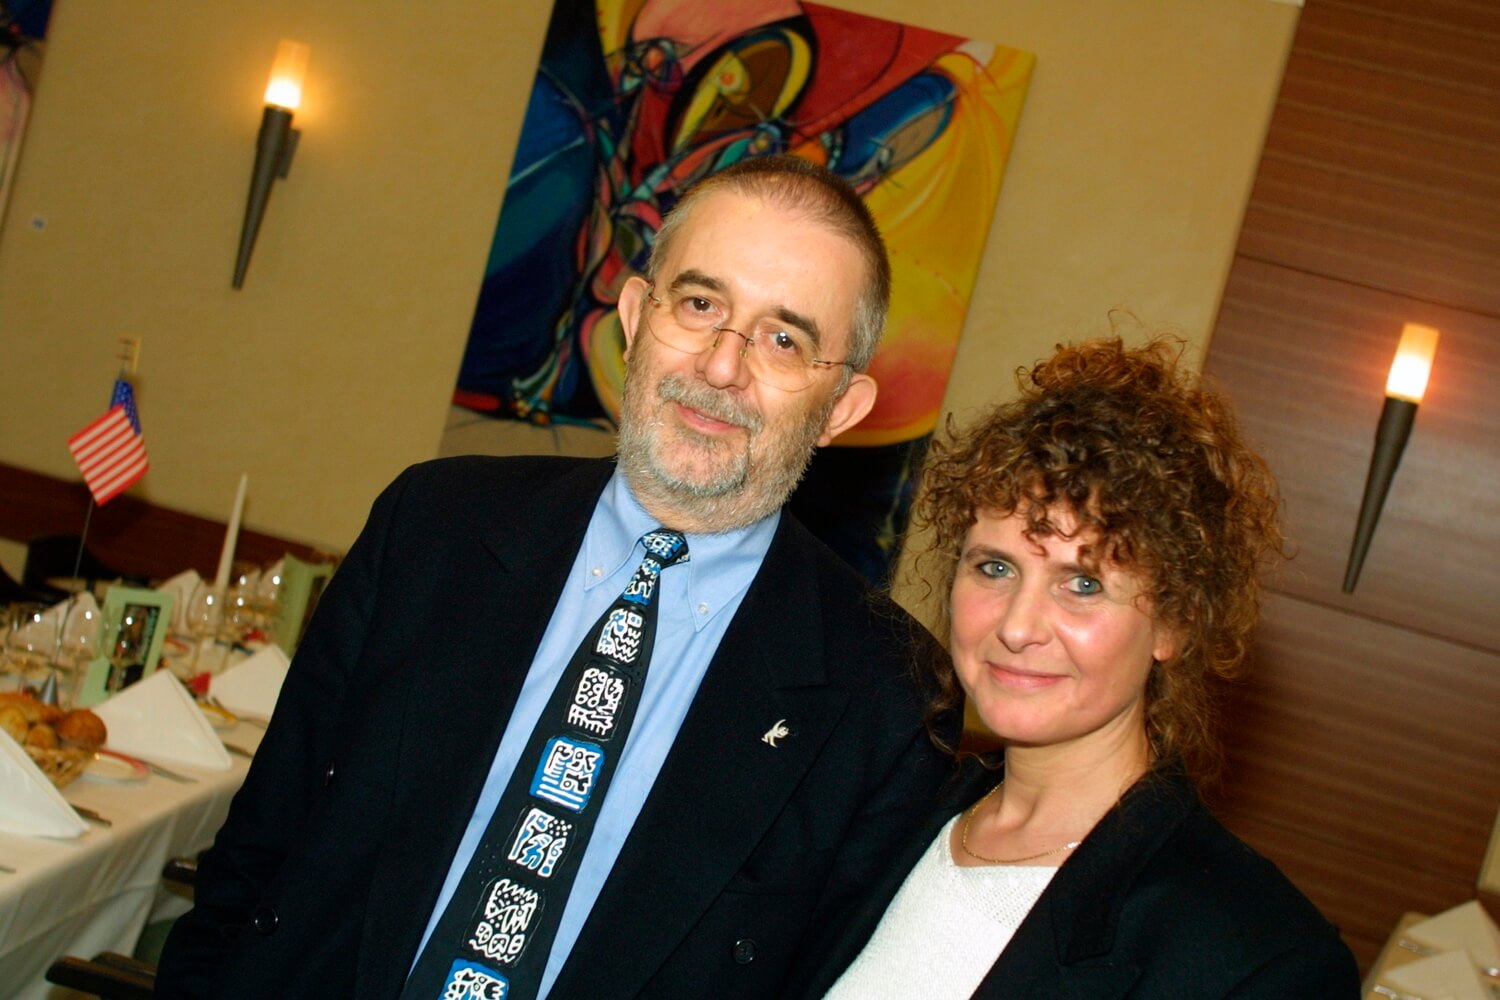 Photo of Guests at the artist and painter Michael J. Korber's at his Gala Event at Club Monet in Luxembourg City, Luxembourg.